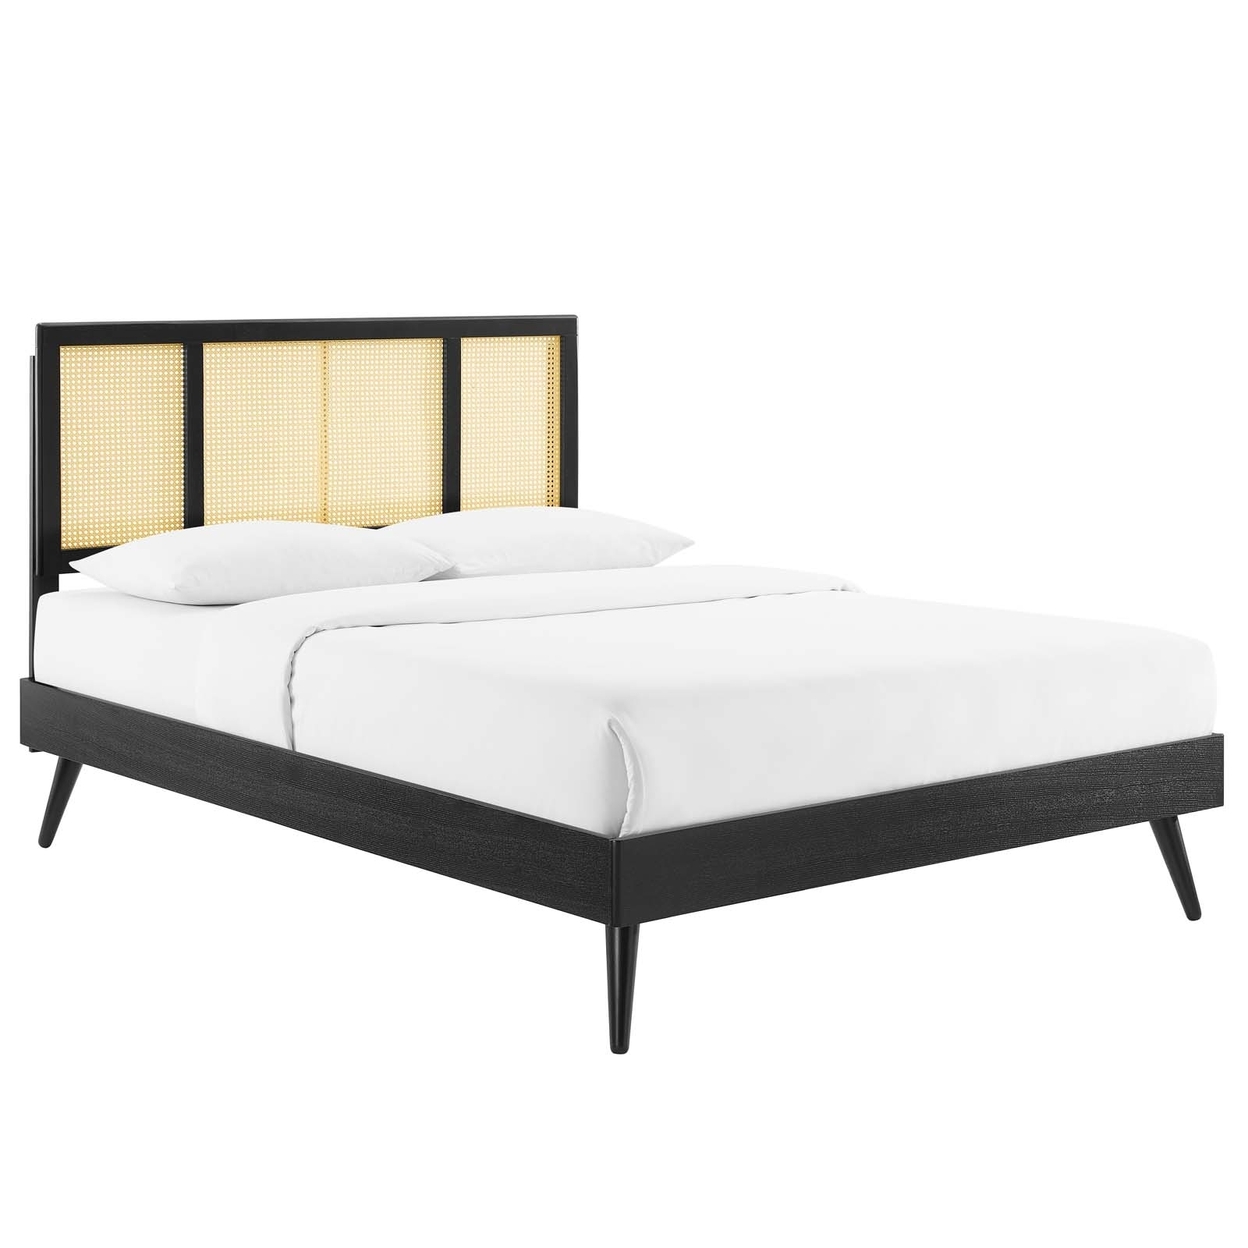 Kelsea Cane And Wood Queen Platform Bed With Splayed Legs, Black